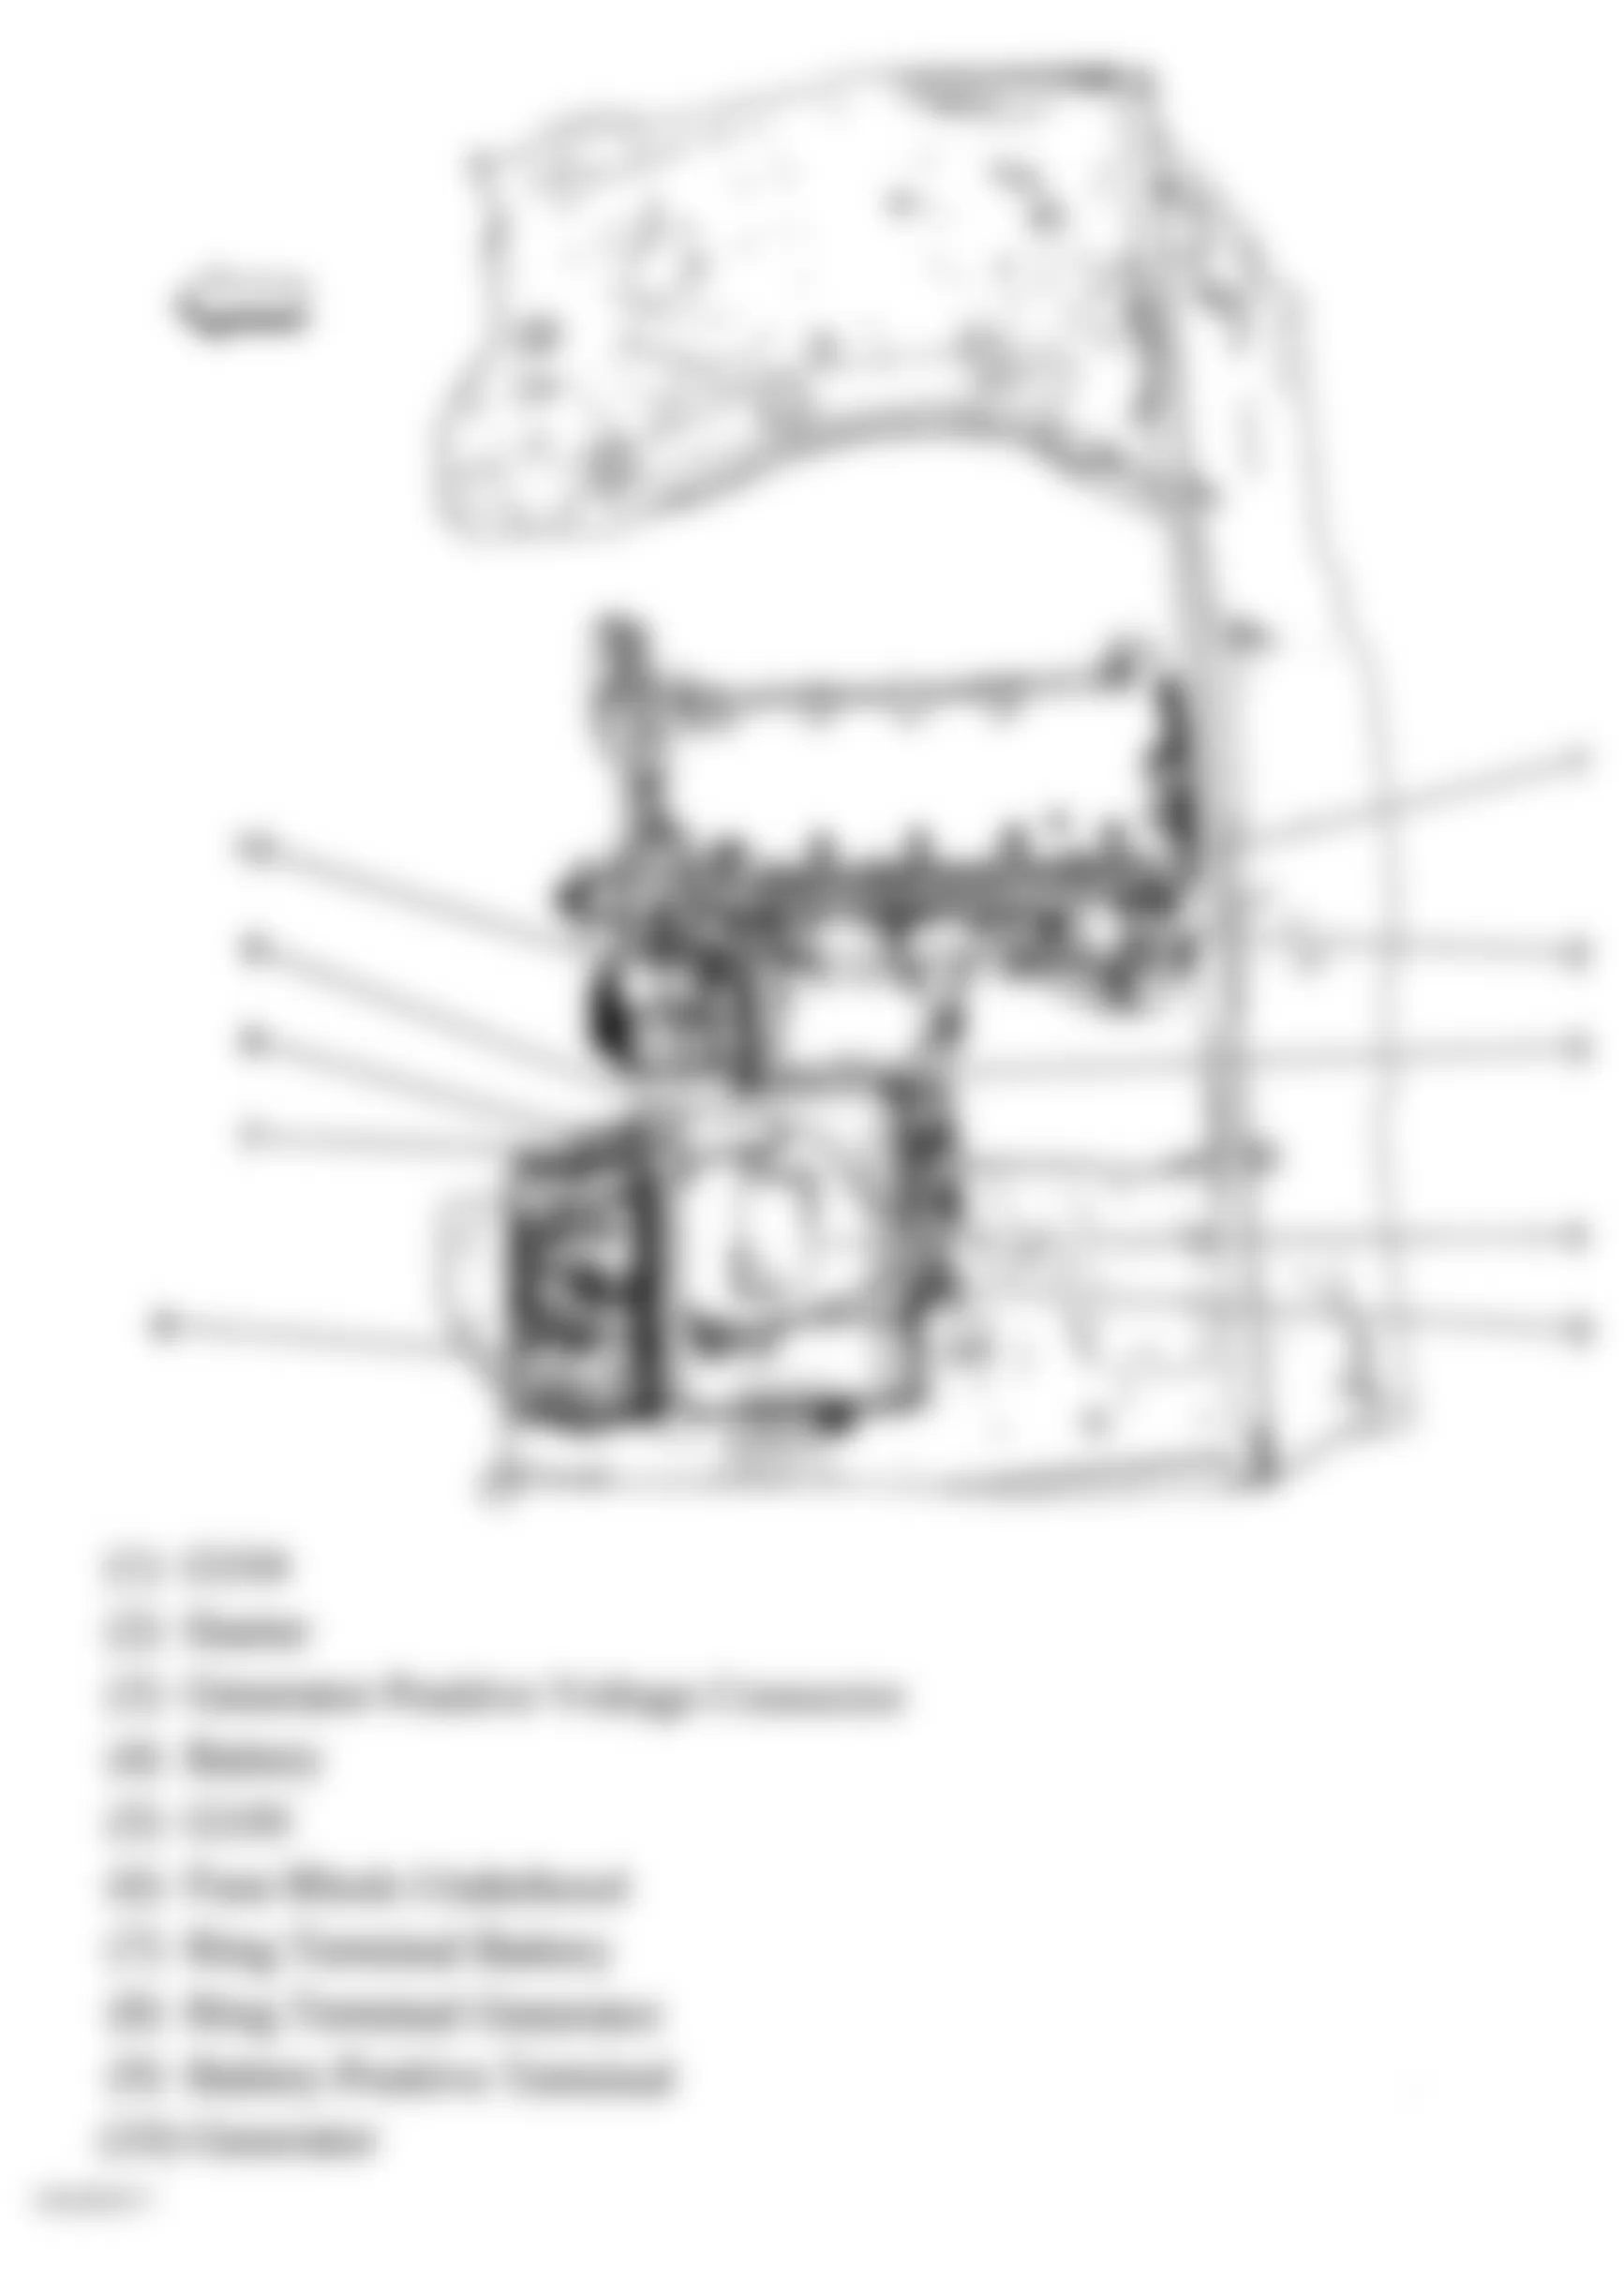 Chevrolet Colorado 2004 - Component Locations -  Engine Compartment (Top View)